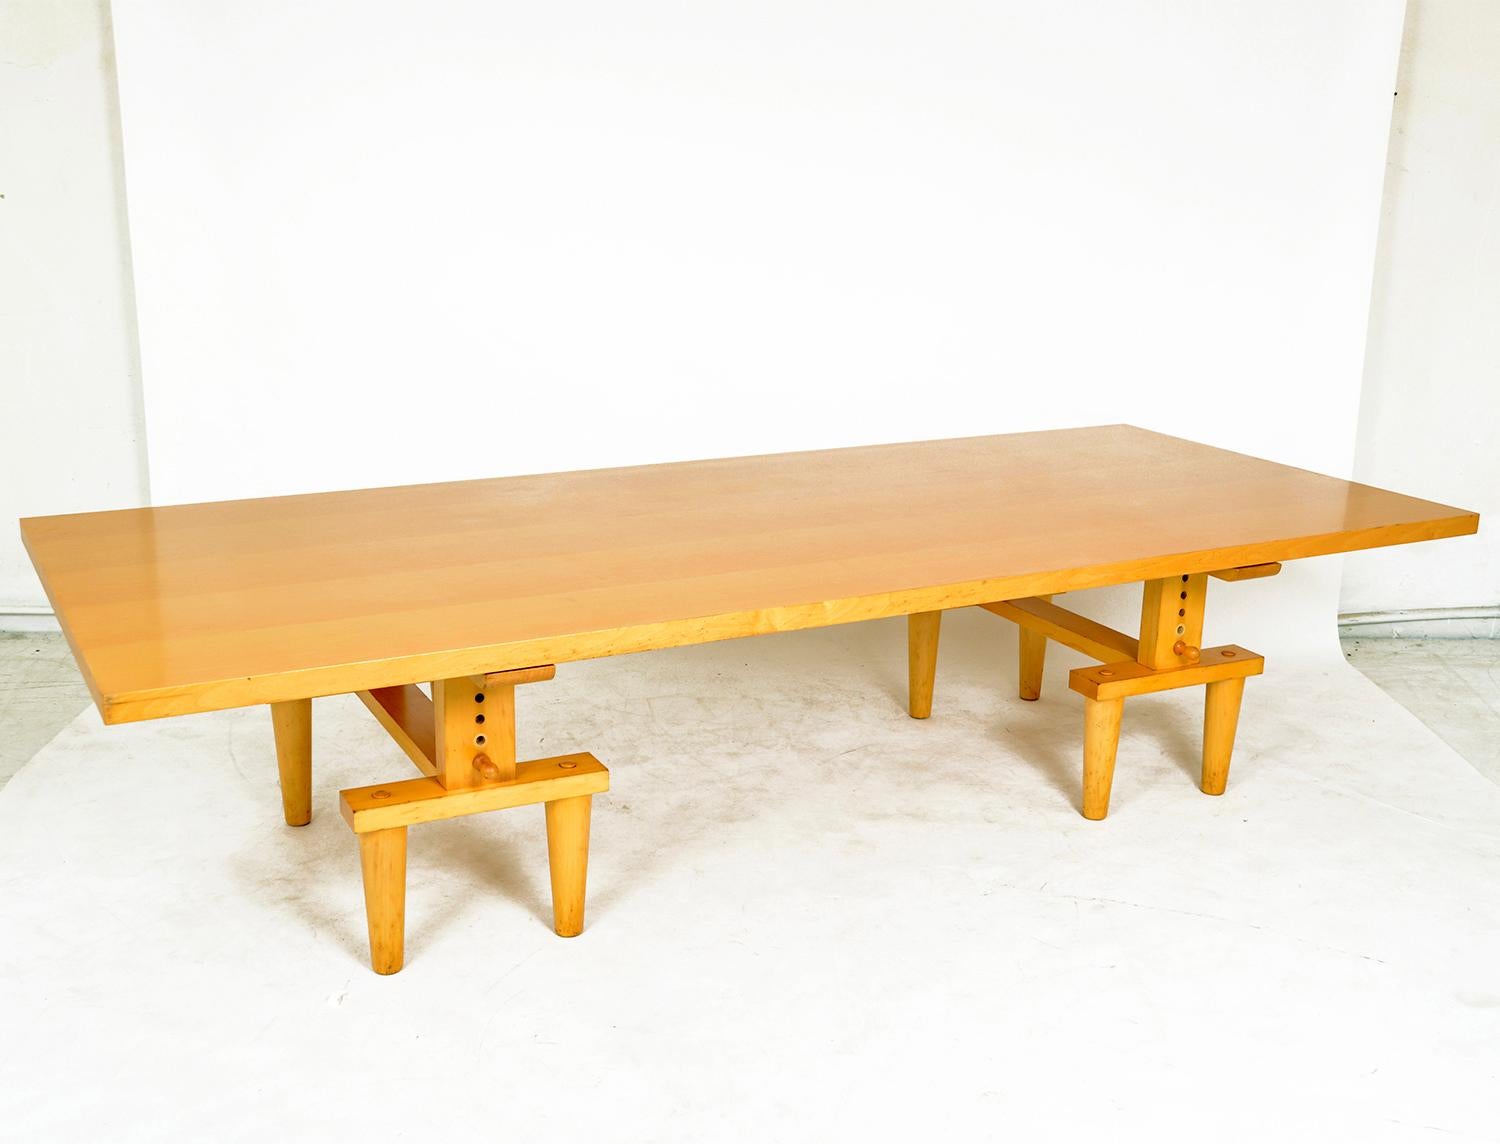 An opportunity to buy a rare and substantially sized ‘2630 Bramante’ trestle table originally designed in 1950 by Achille & Pier Giacomo Castiglioni for Zanotta, Italy. A reversible beech wooden top, sits upon a pair of solid beech trestle bases.